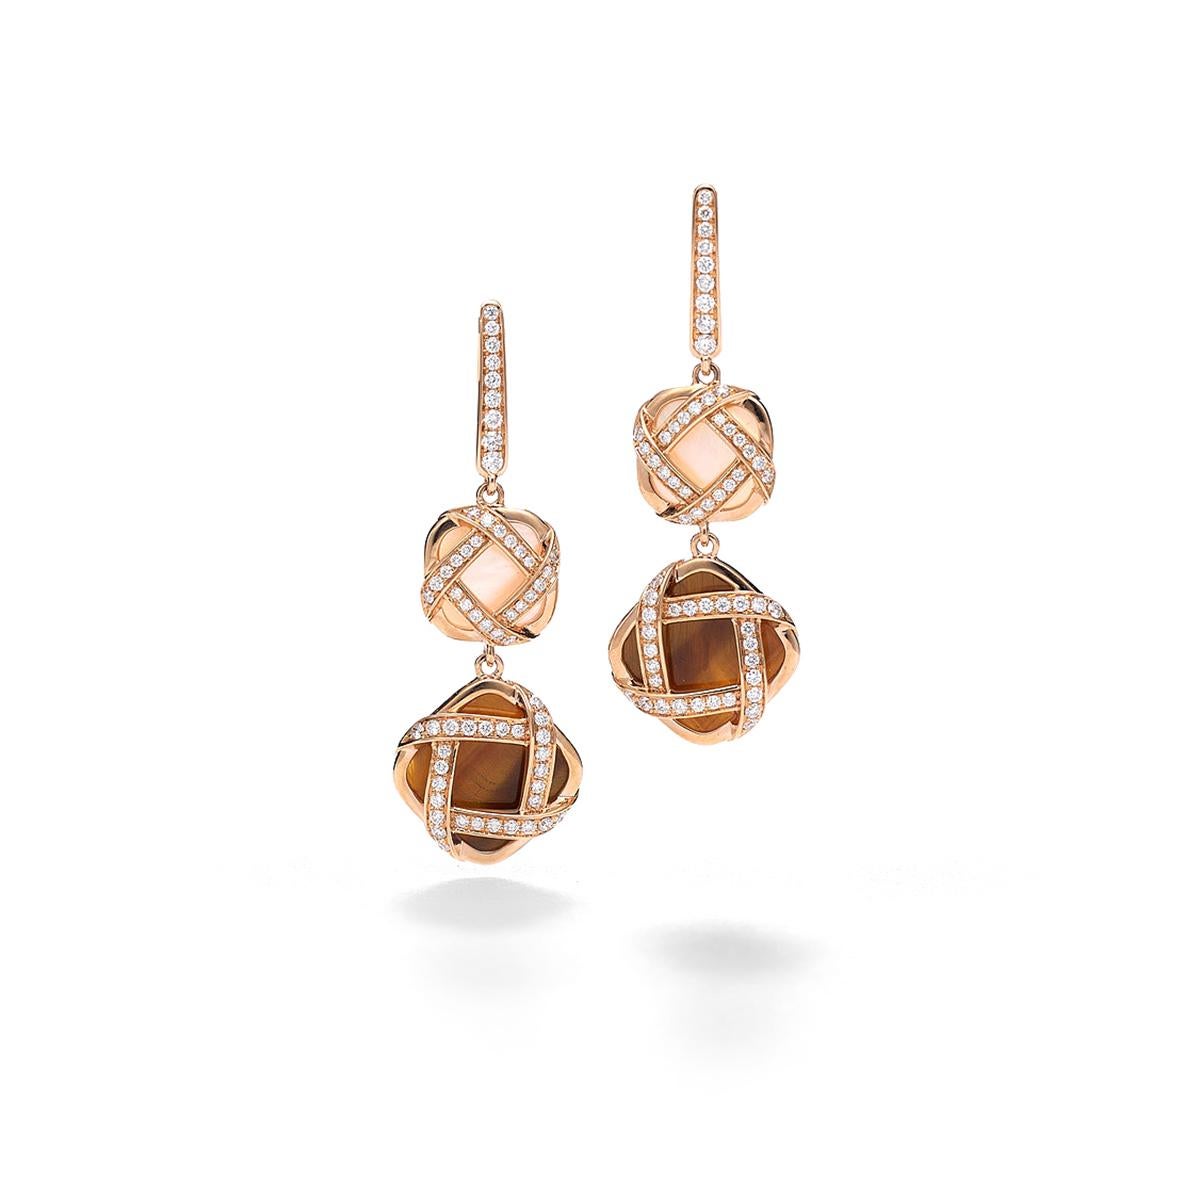 Earrings in 18kt pink gold set with 112 diamonds 0.82 cts and 2 tiger eye 4.02 cts and 2 mother of pearl 2.17 cts             